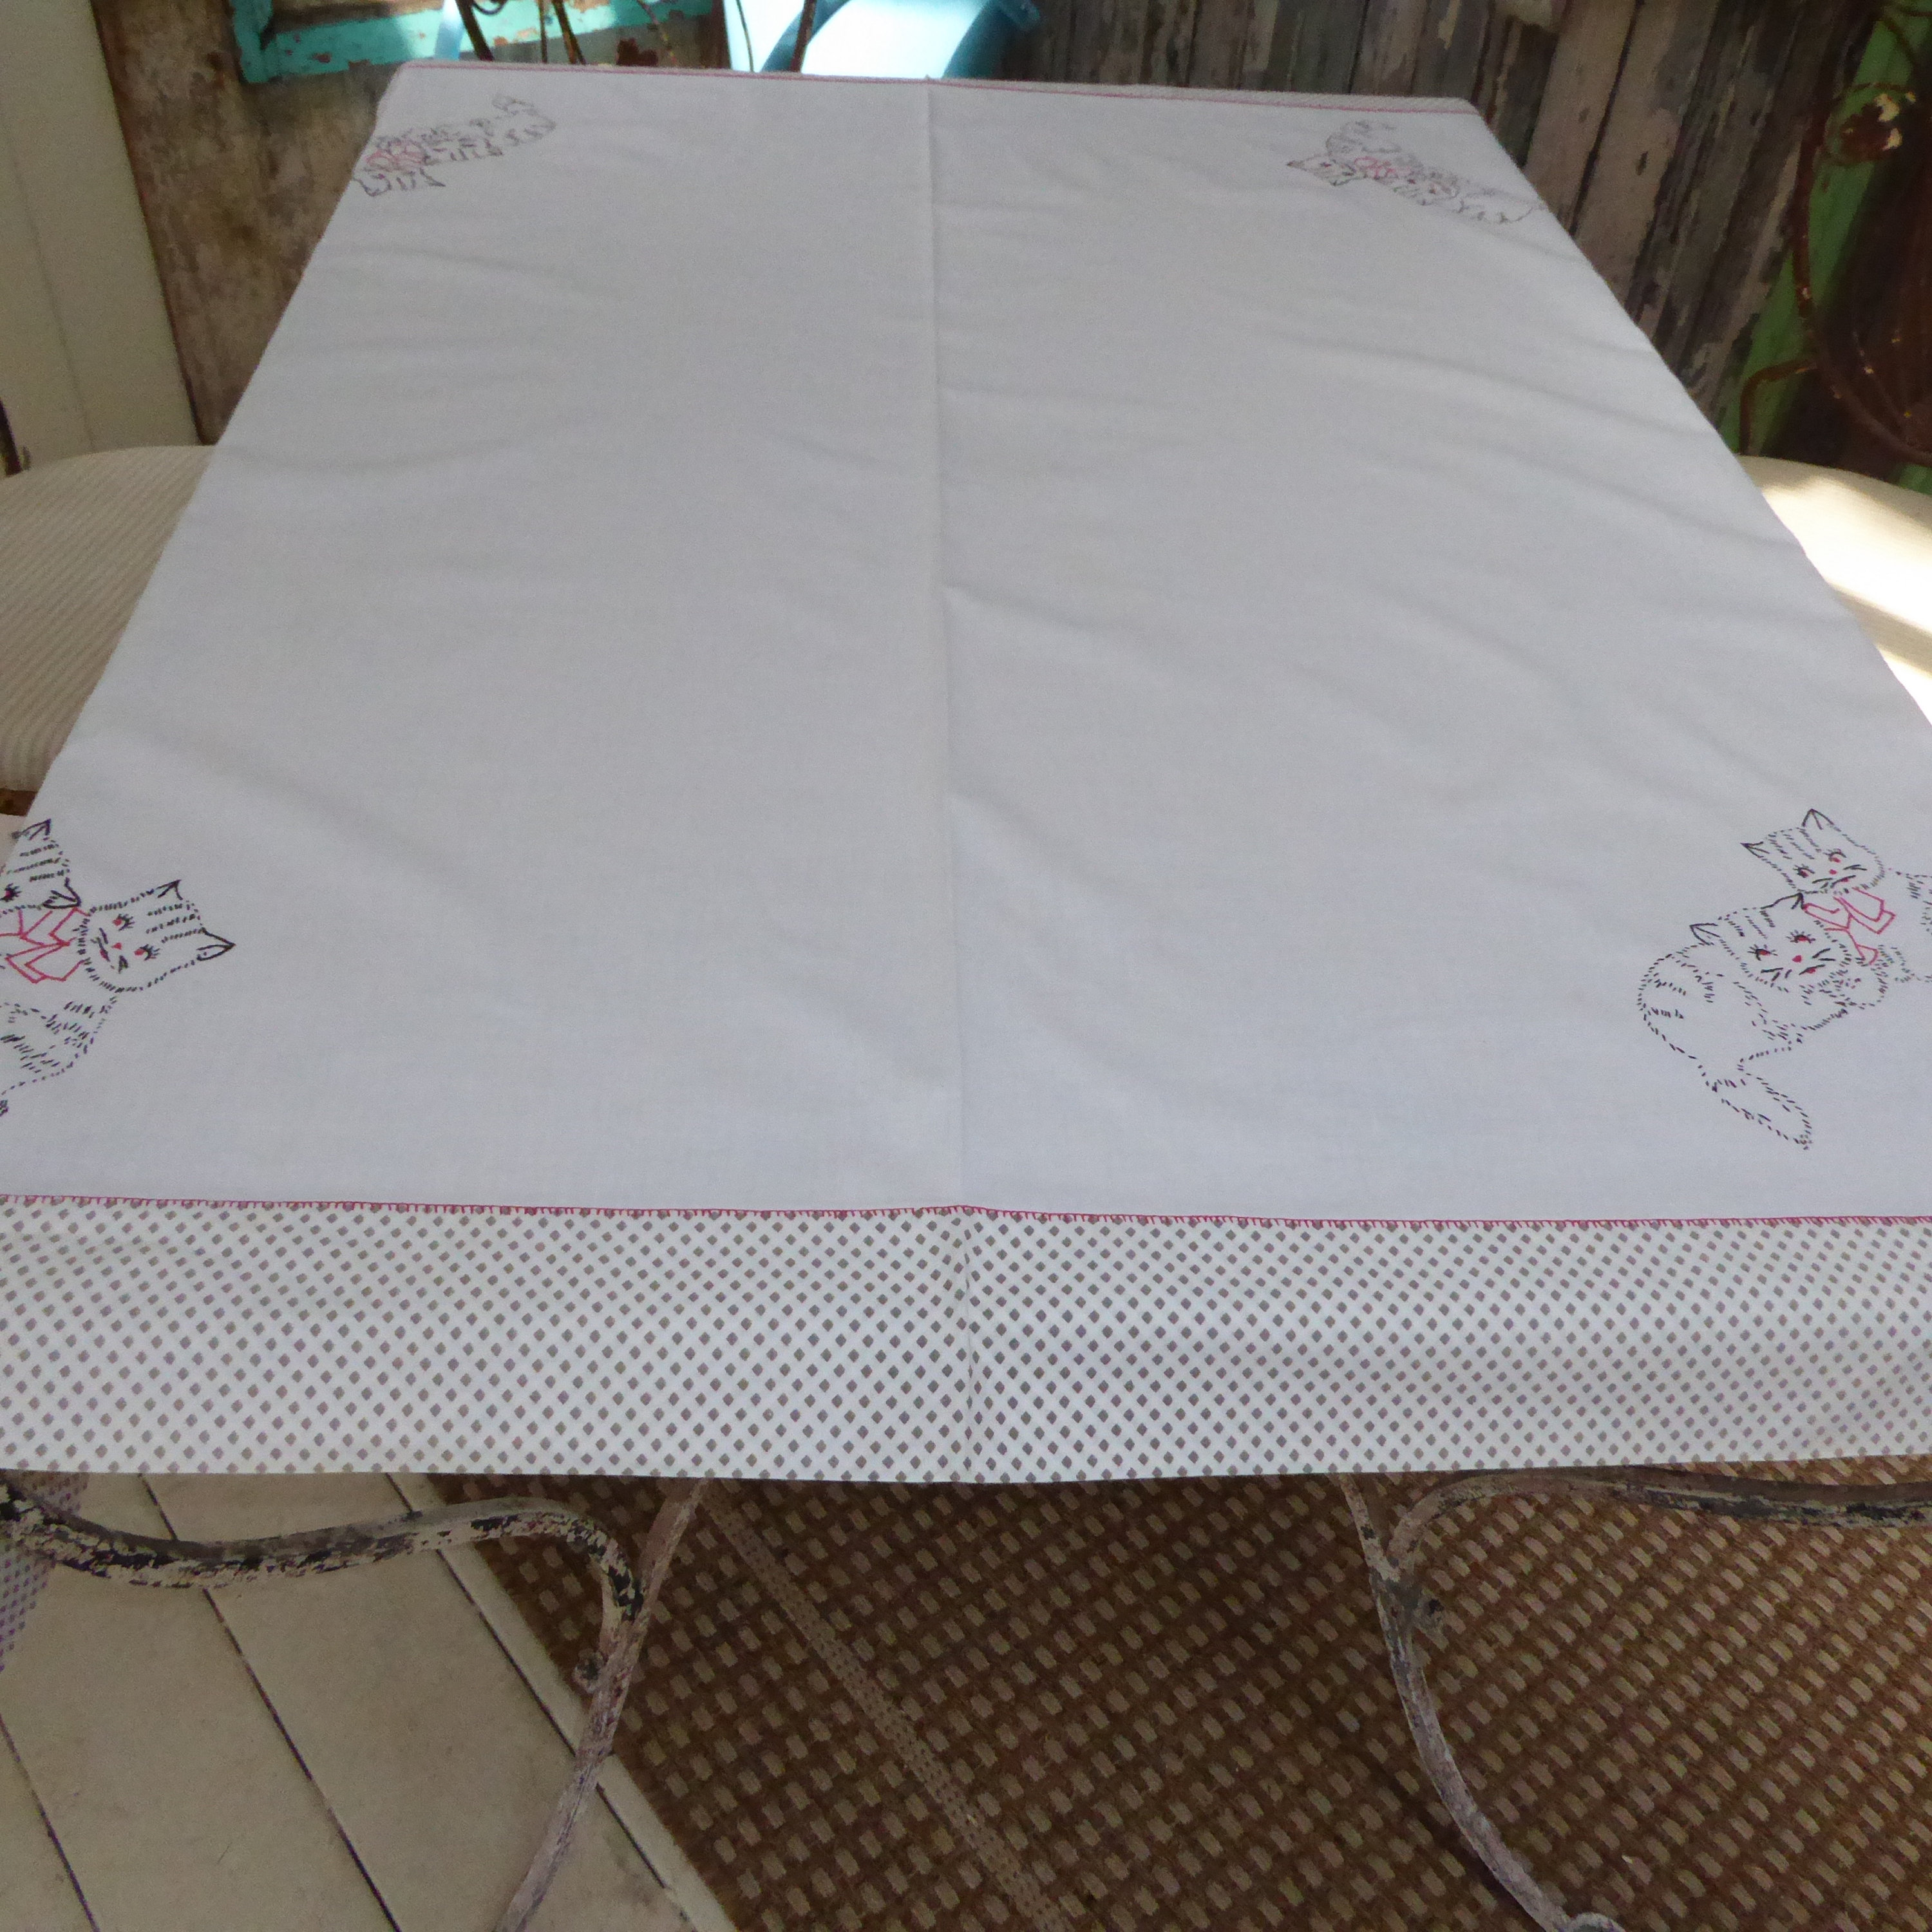 Vintage  White  Heavy Cotton Tablecloth w Crochet Inserts on Four Corners 2 are Deer  54L x 52W Cottage Country Farm House Rustic